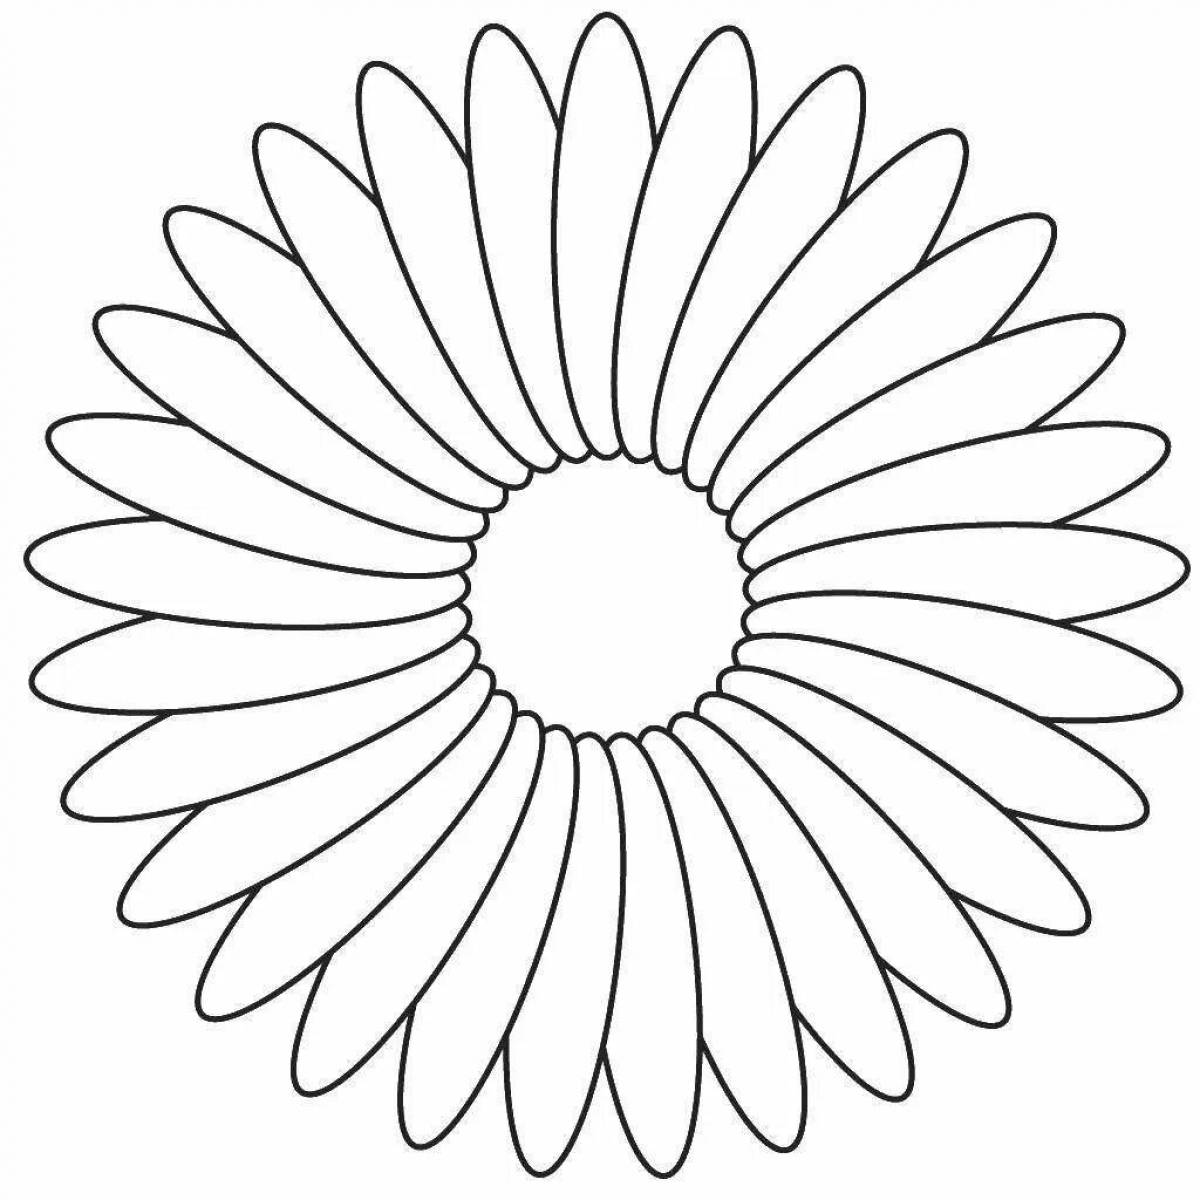 Exquisite chamomile coloring page